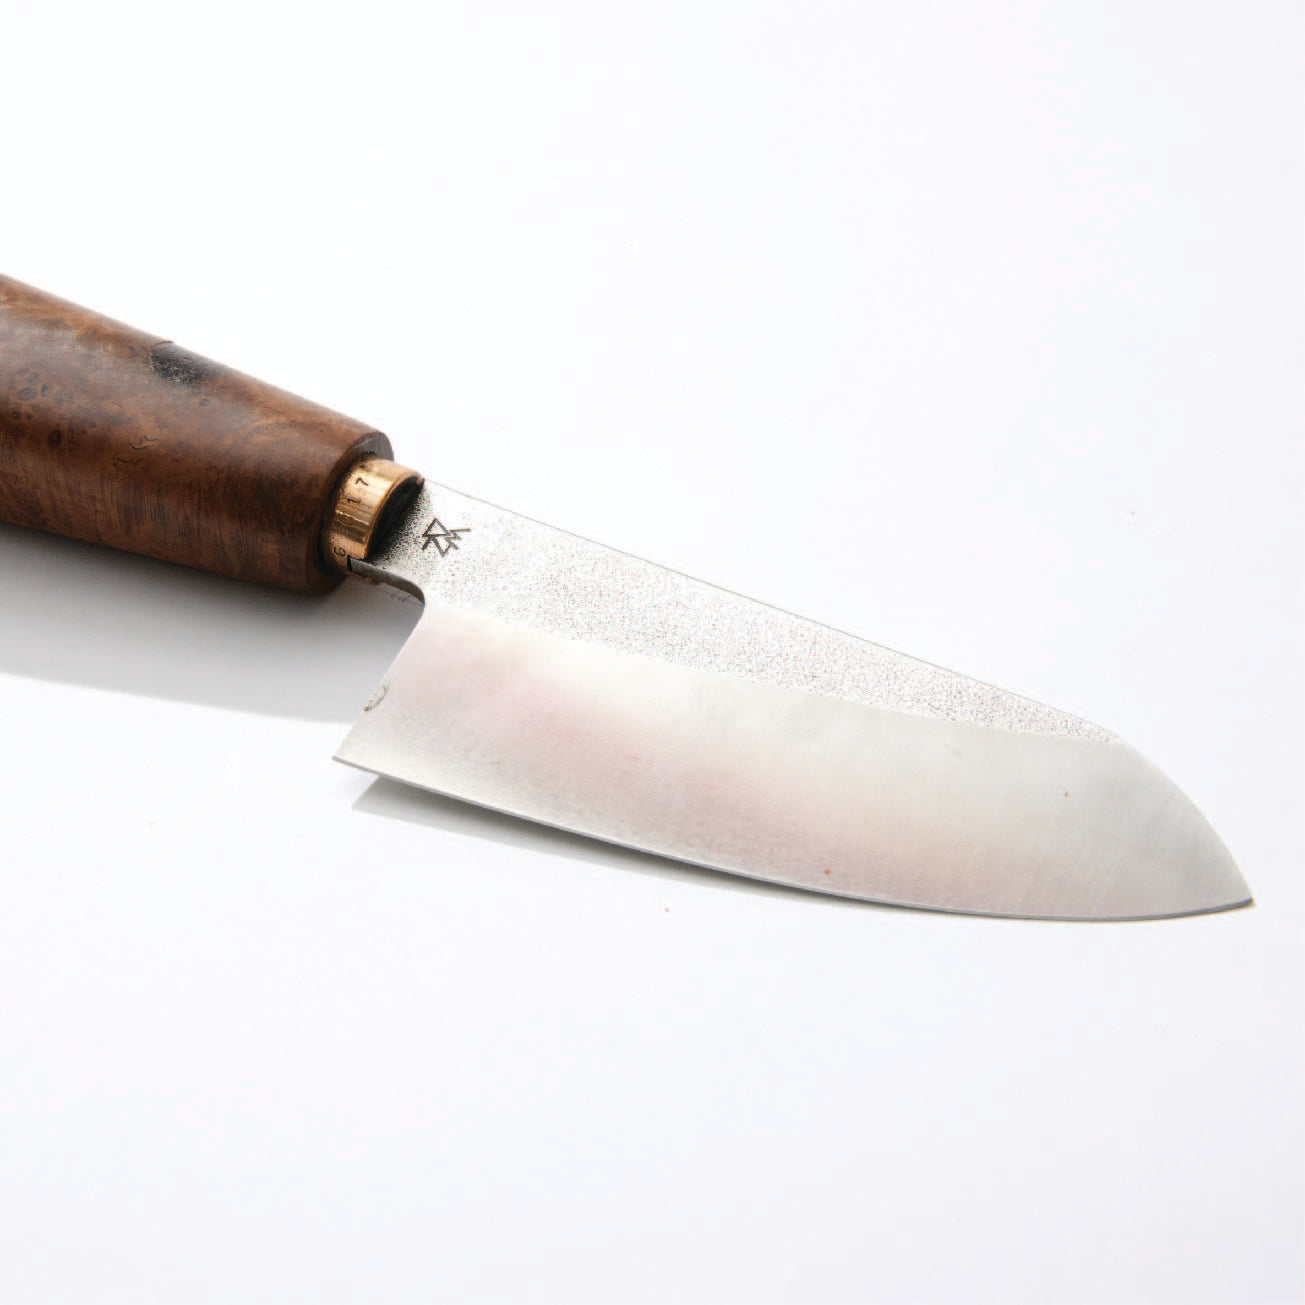 a knife with a wooden handle on a white surface